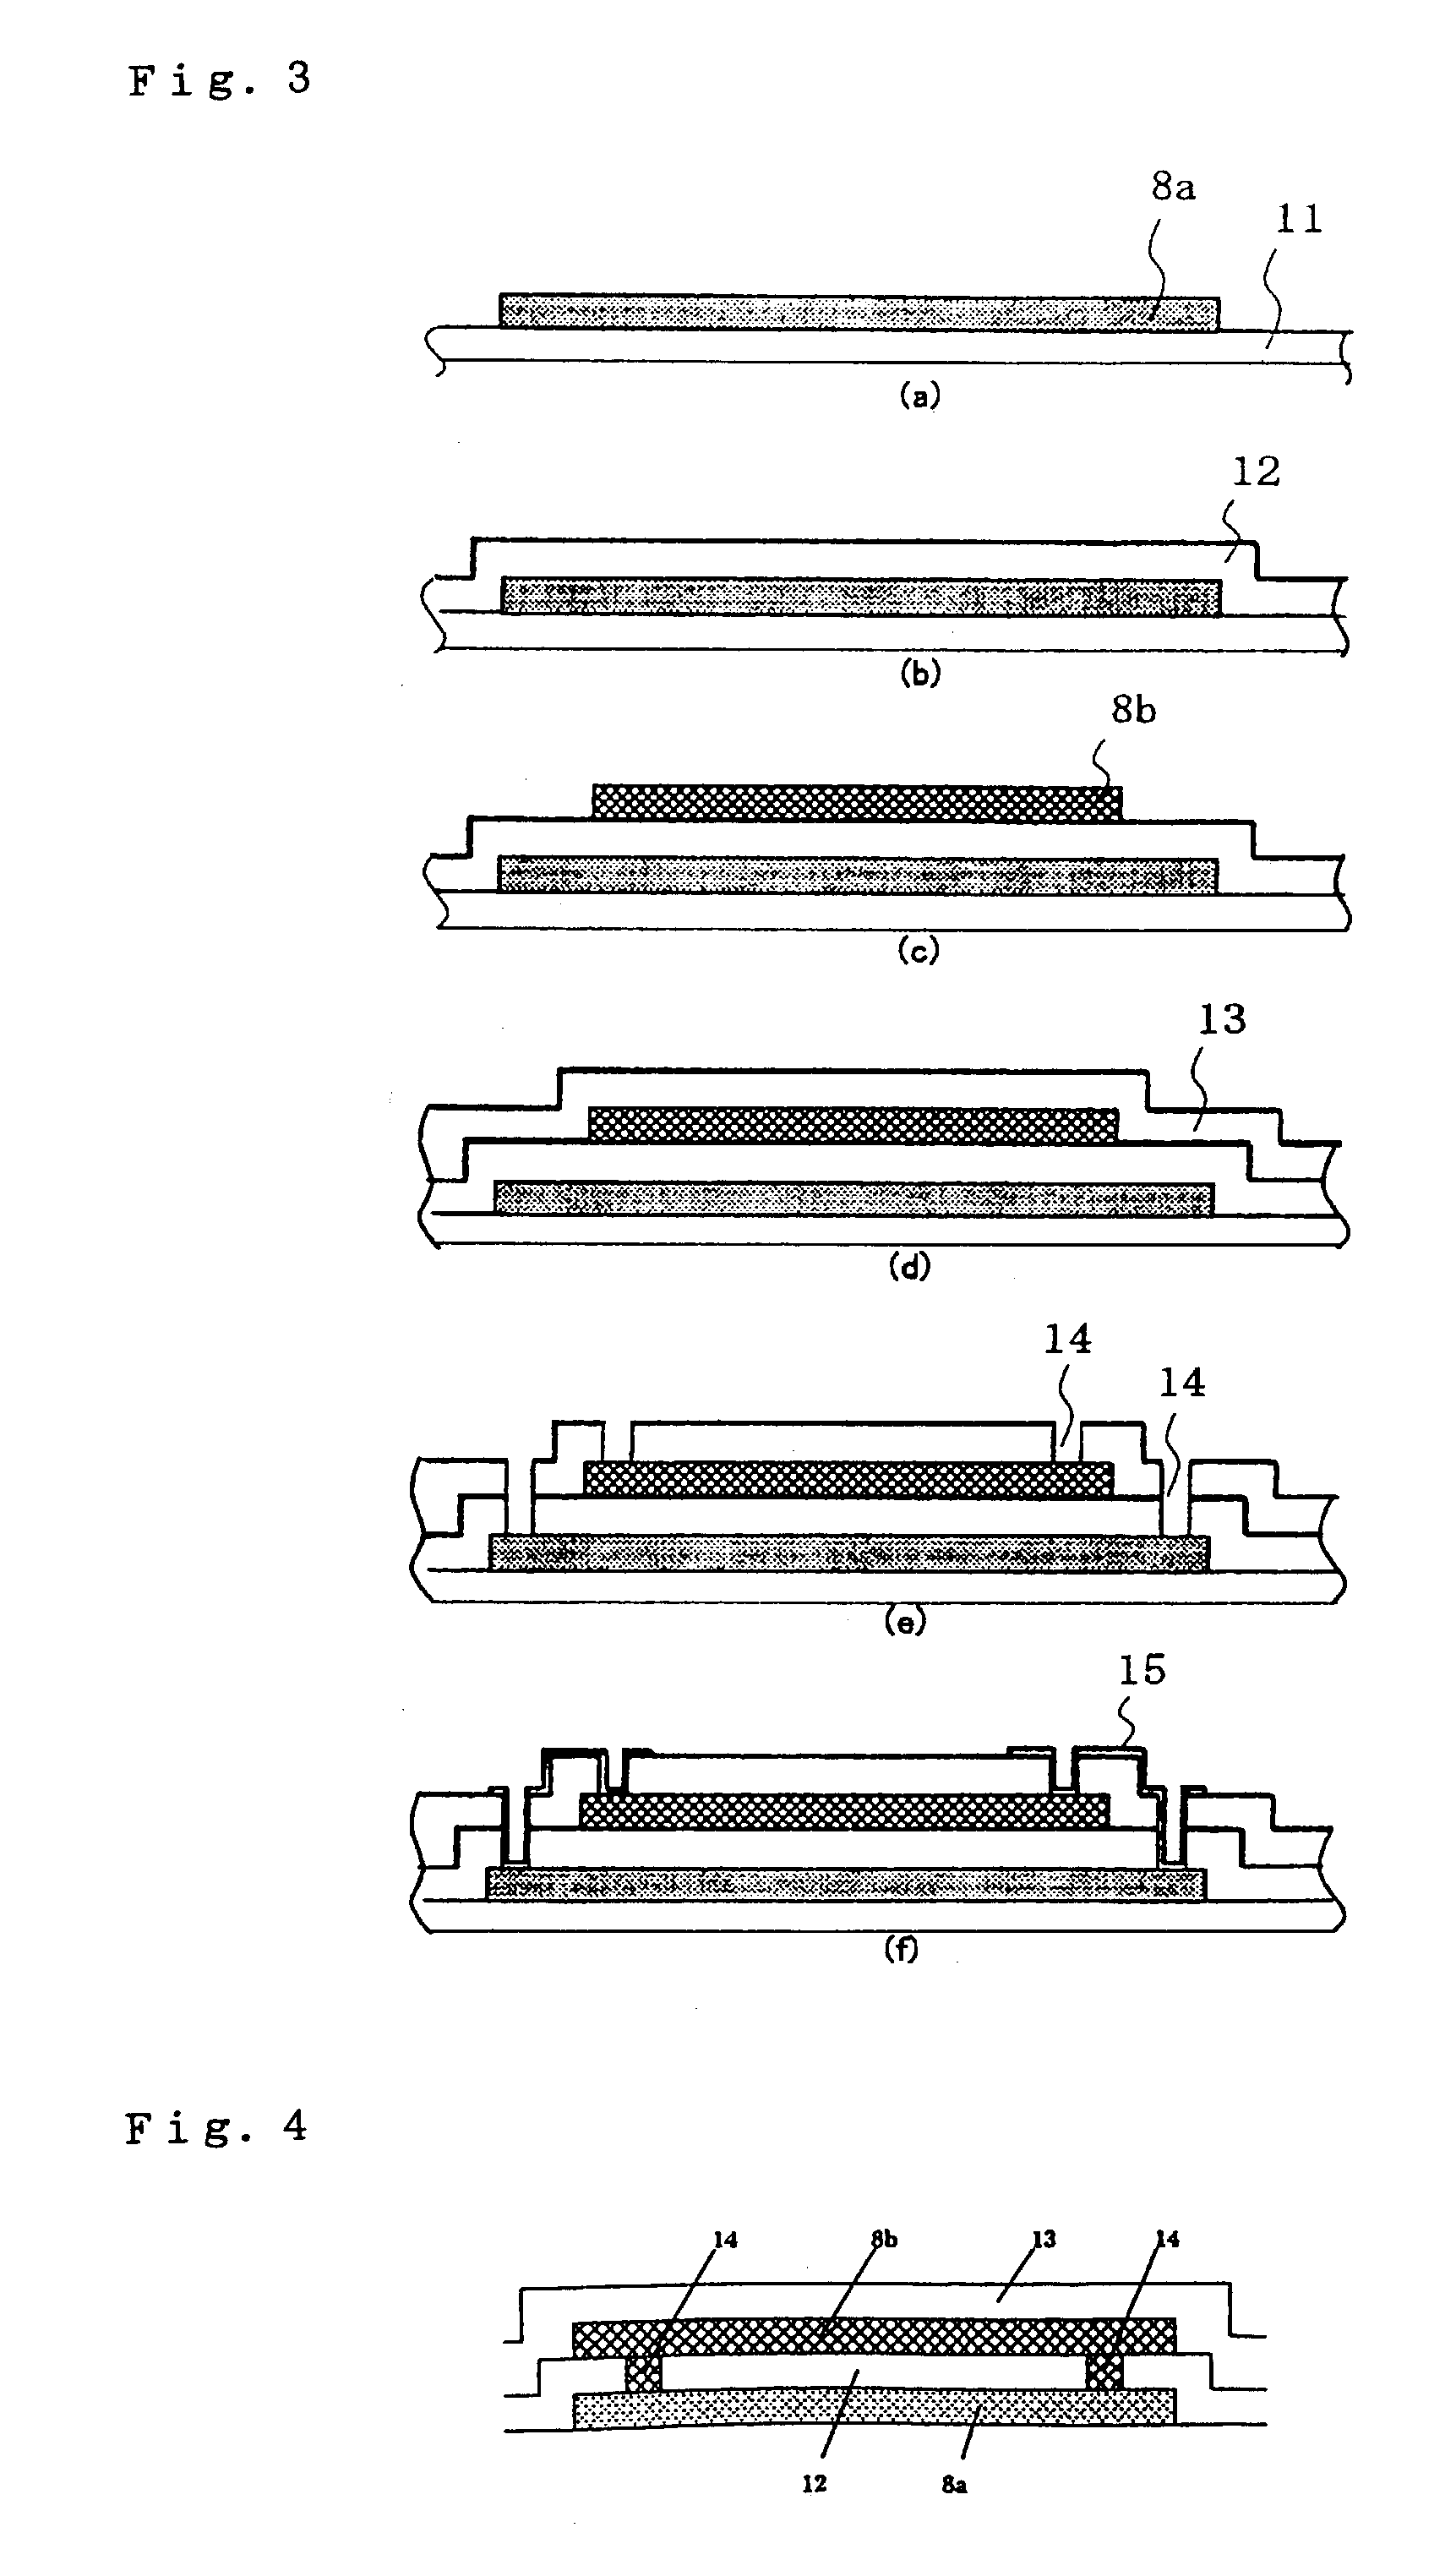 Image display having internal wiring with multi-layer structure and manufacturing method thereof having particular wiring connection